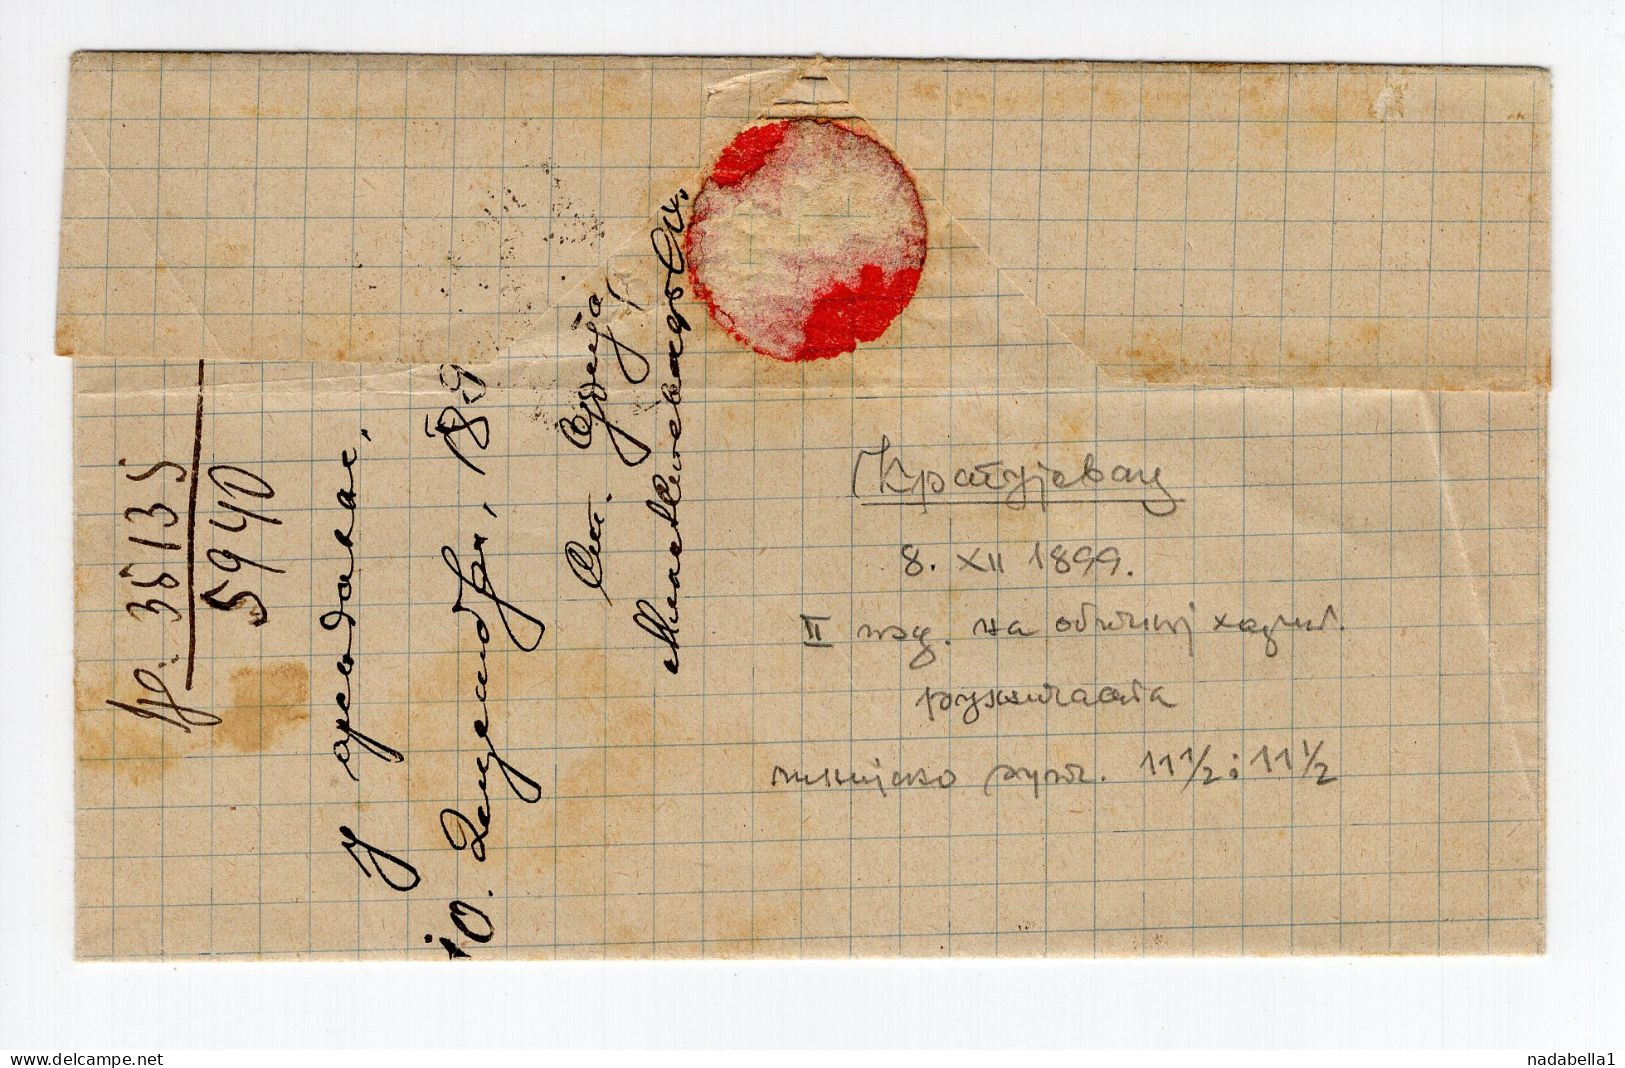 1899. SERBIA,KRAGUJEVAC,LOCAL RATE 10 PARA FOR DOUBLE WEIGHT WE BELIEVE,COVER,INSIDE LETTER MISSING - Serbie